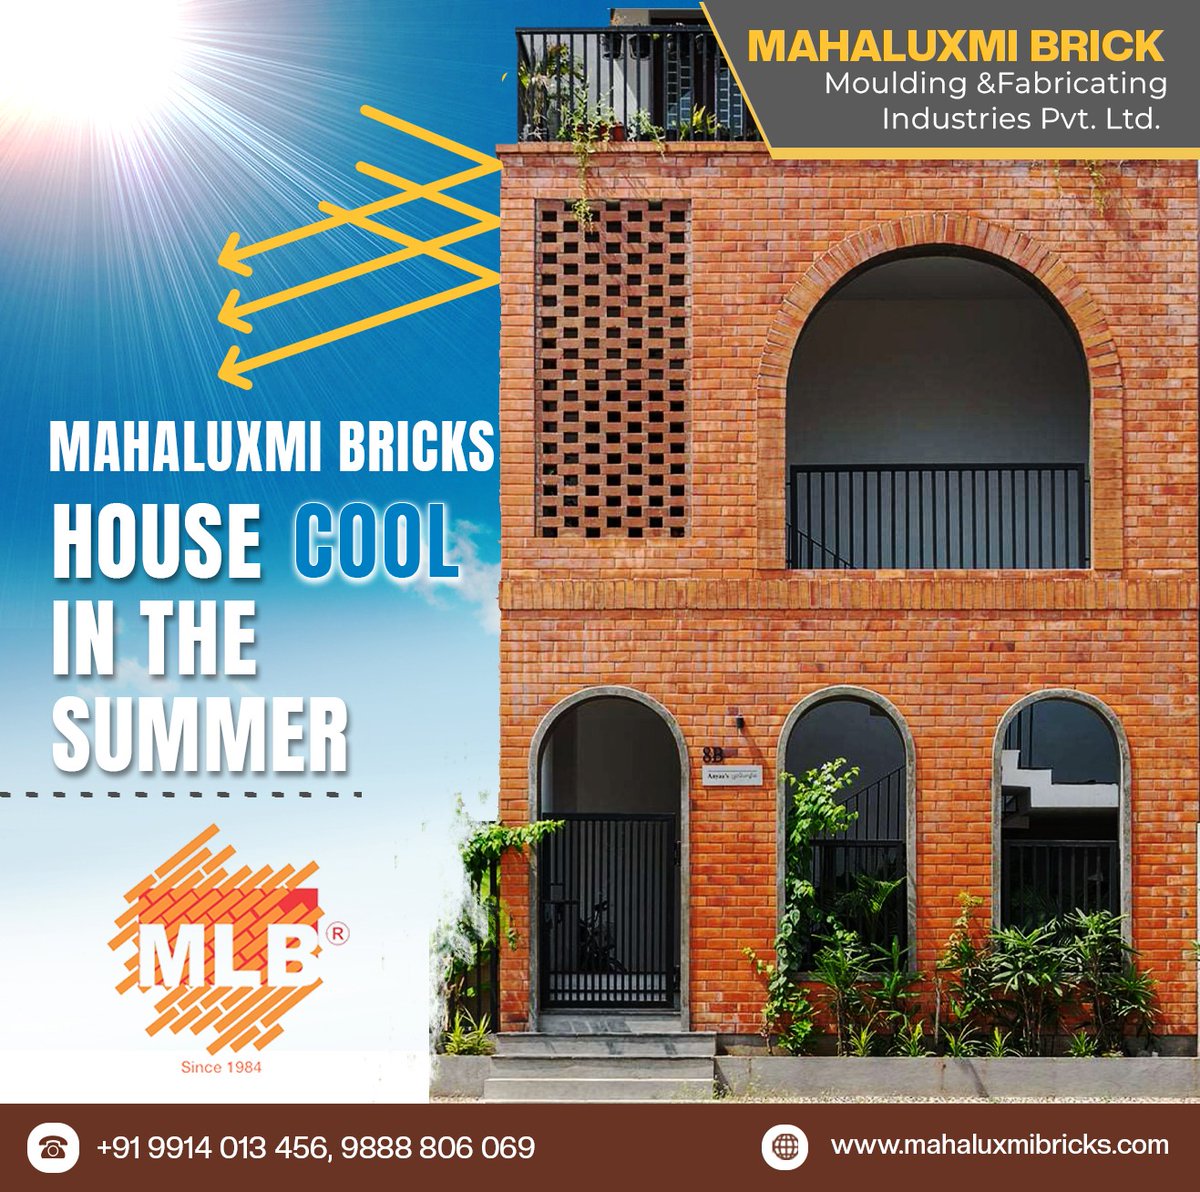 That's a compelling motto! It speaks to the dedication and craftsmanship behind the work. What's the story behind Mahaluxmi Brick Moulding & Fabricating Industries Pvt. Ltd
.
#MahaluxmiBrickMoulding #HighQualityBricks #ReliableTiles #ConstructionMaterials #BuildingDreams